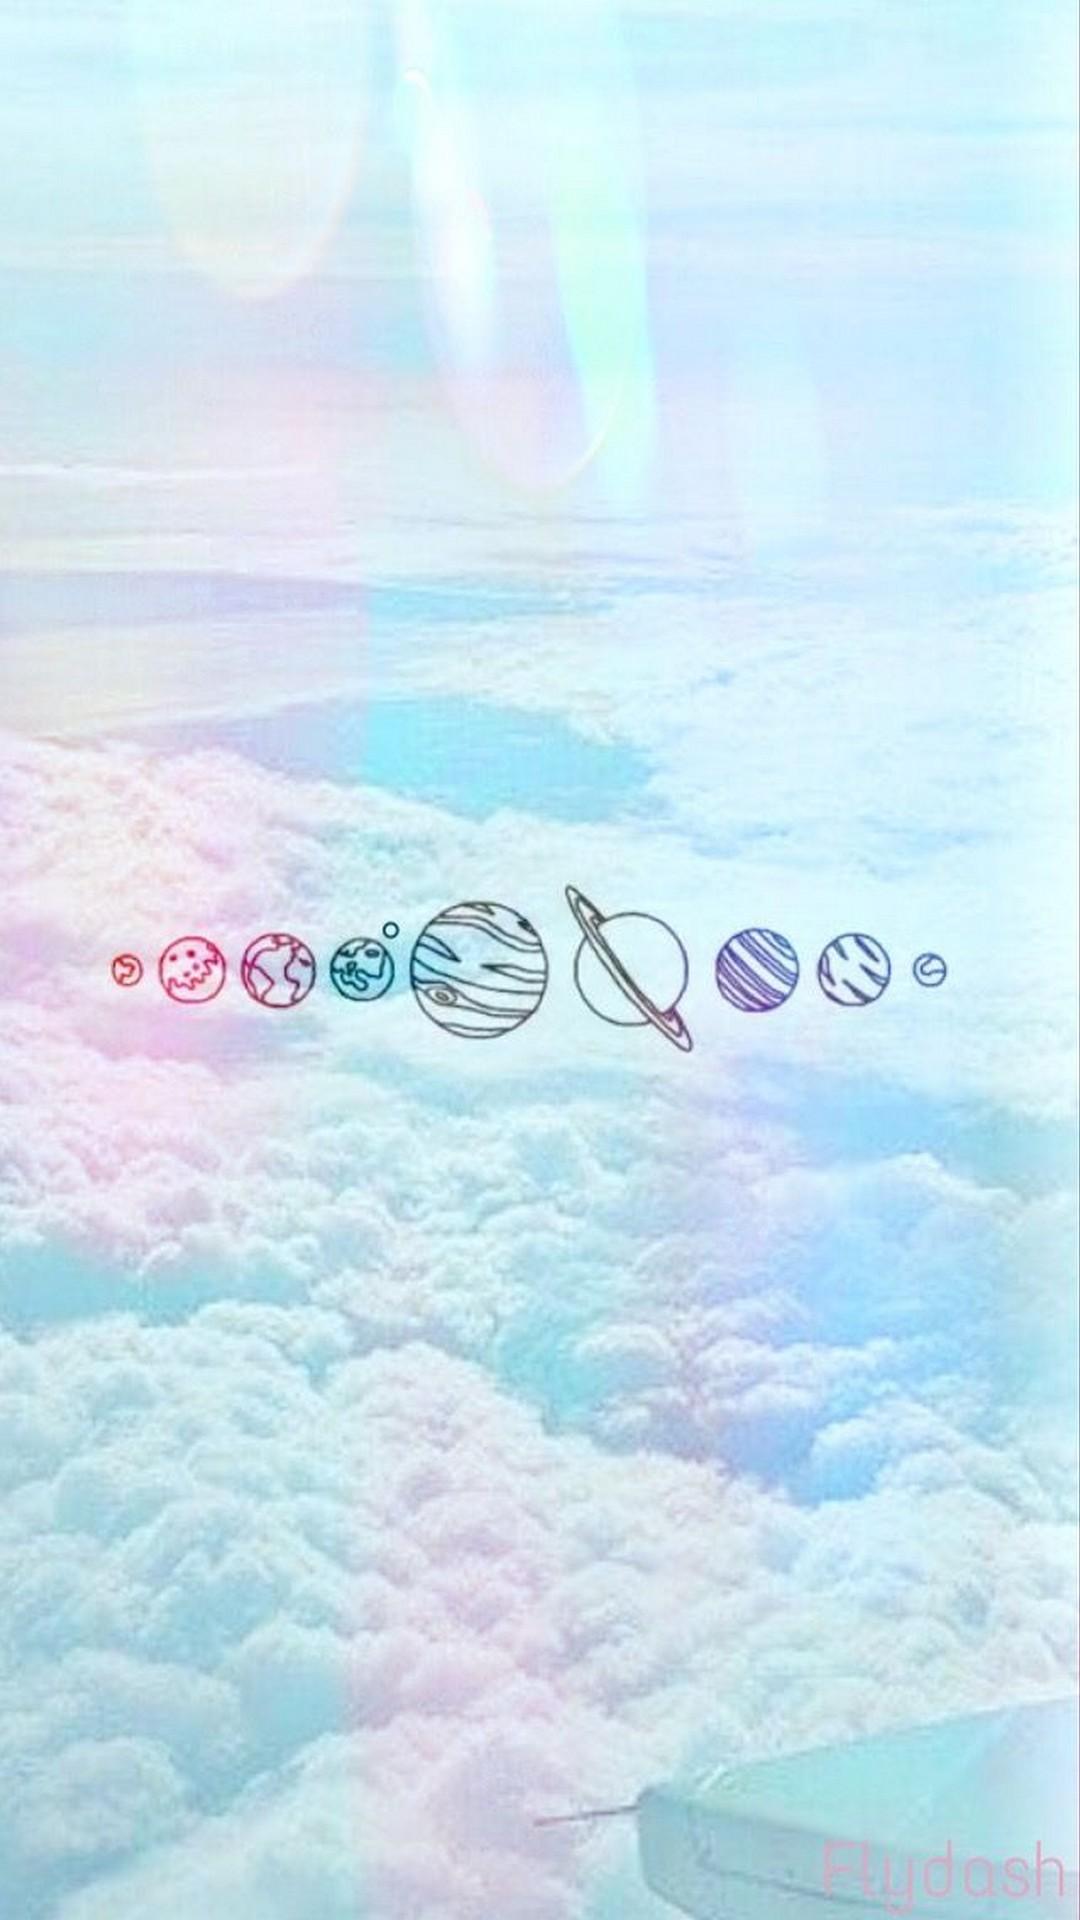 Aesthetic mobile wallpapers 31 1